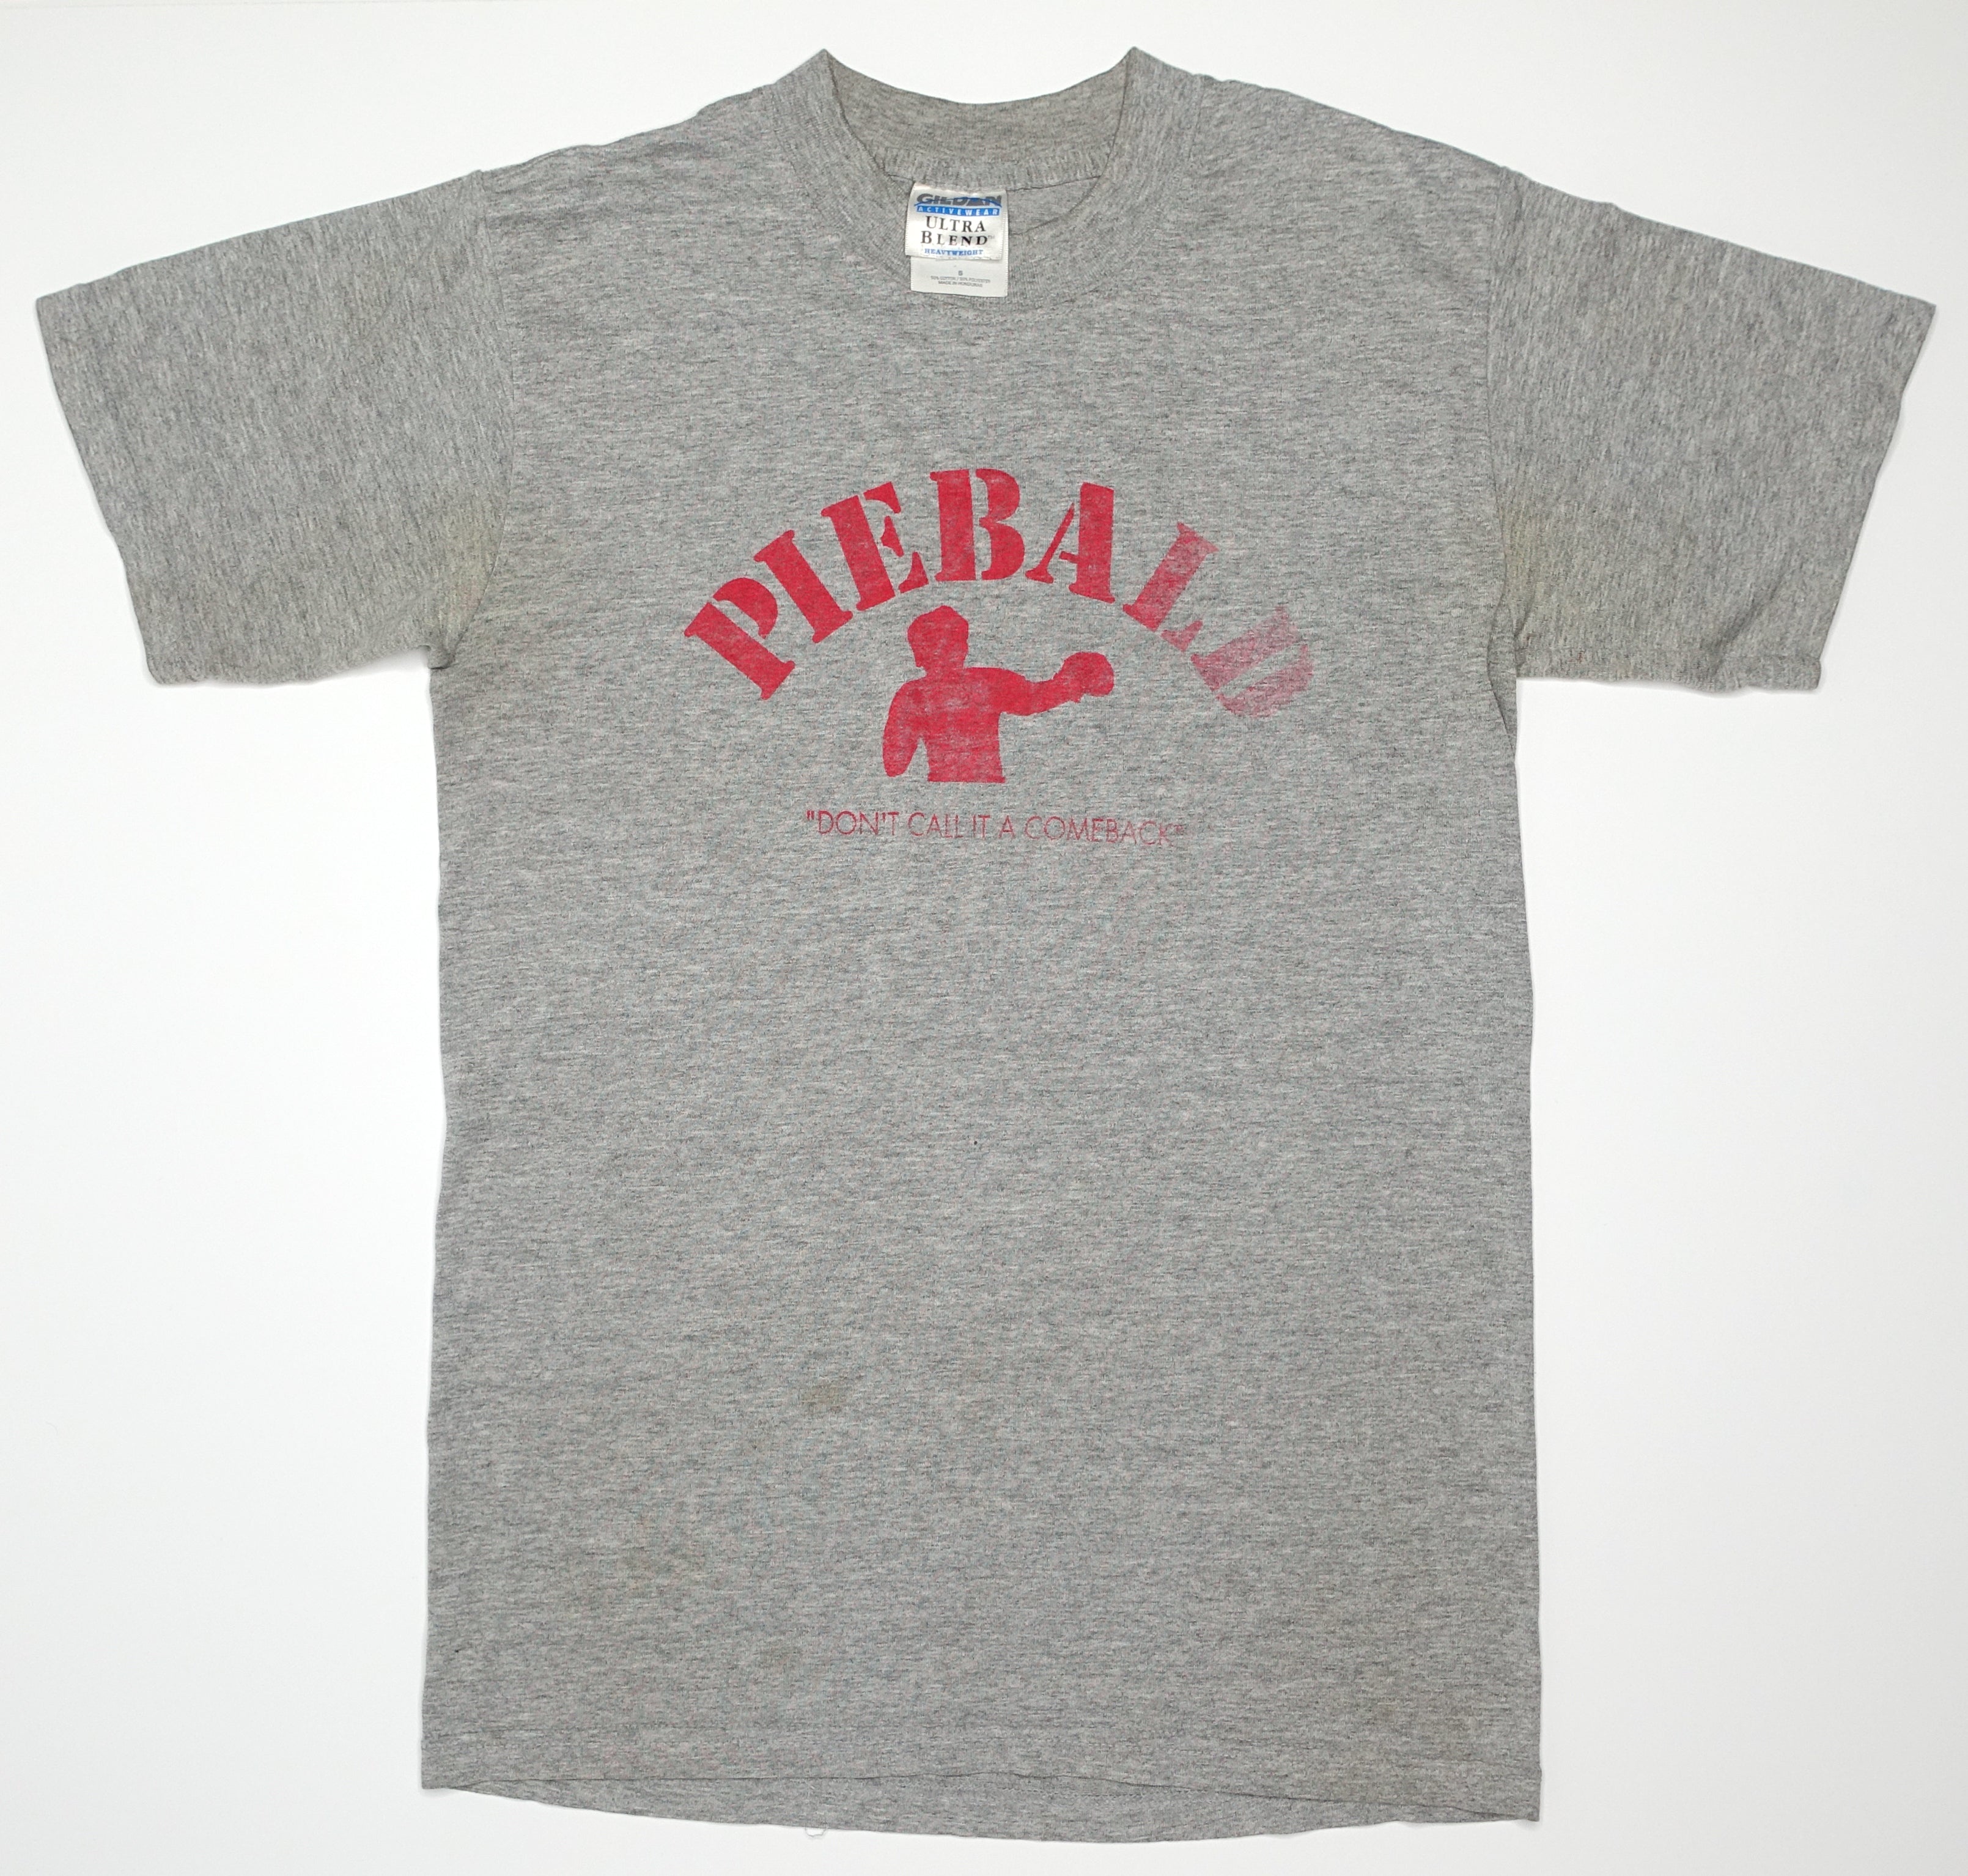 Piebald - Don't Call It A Comeback 00's Tour Shirt Size Small